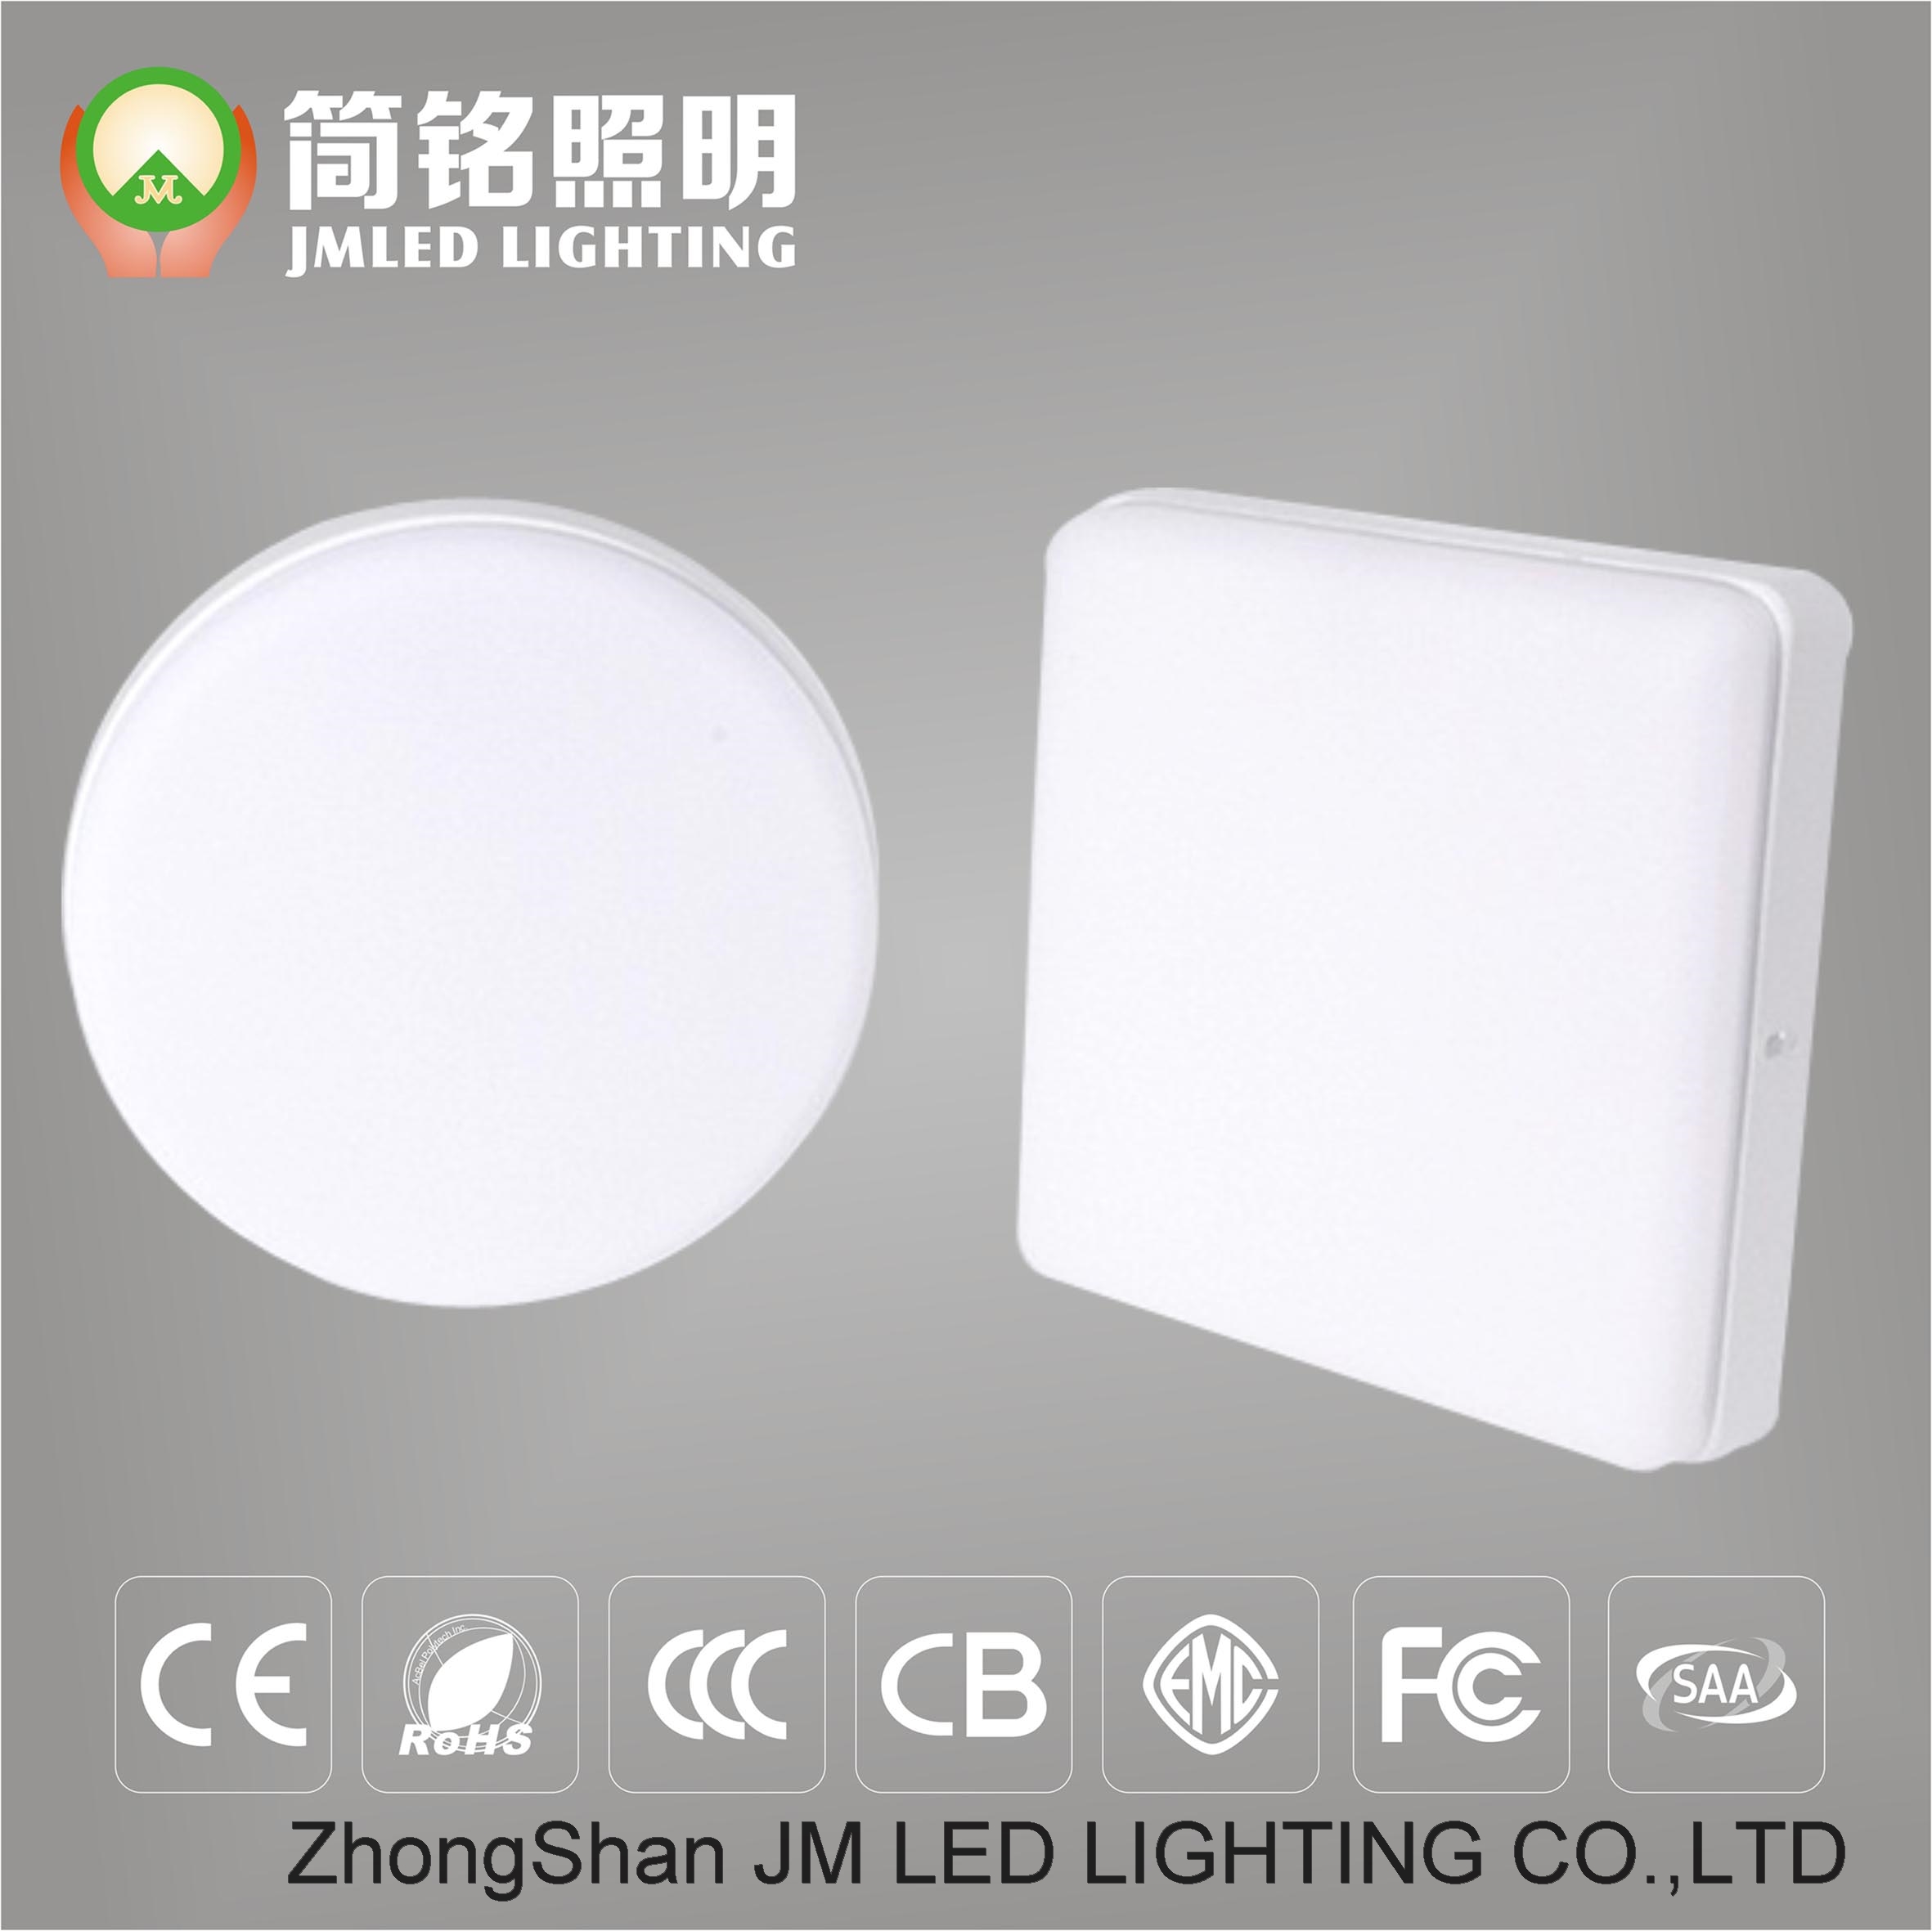 frameless led down light anti insects Free opening hole size panel light original manufacture 12w